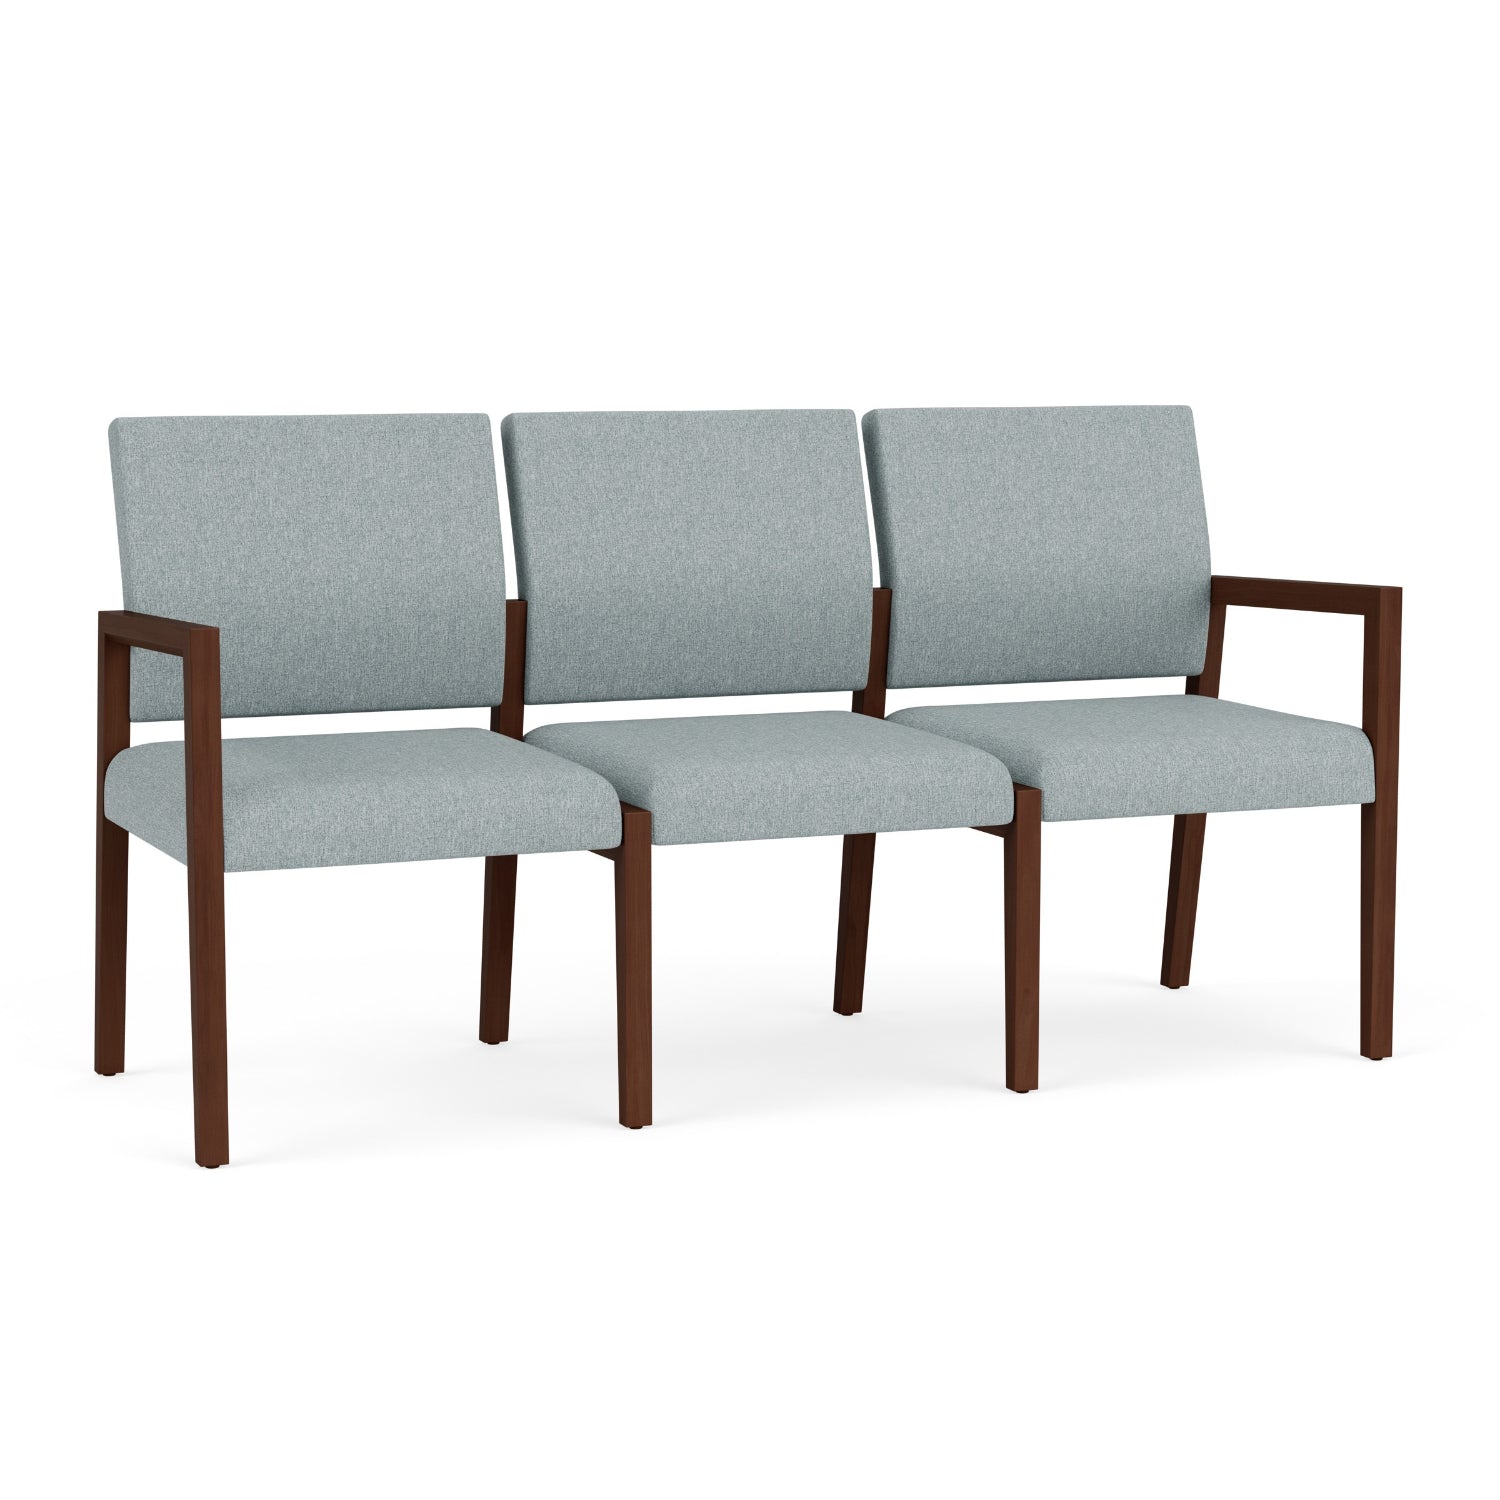 Brooklyn Collection Reception Seating, 3 Seat Sofa, Healthcare Vinyl Upholstery, FREE SHIPPING